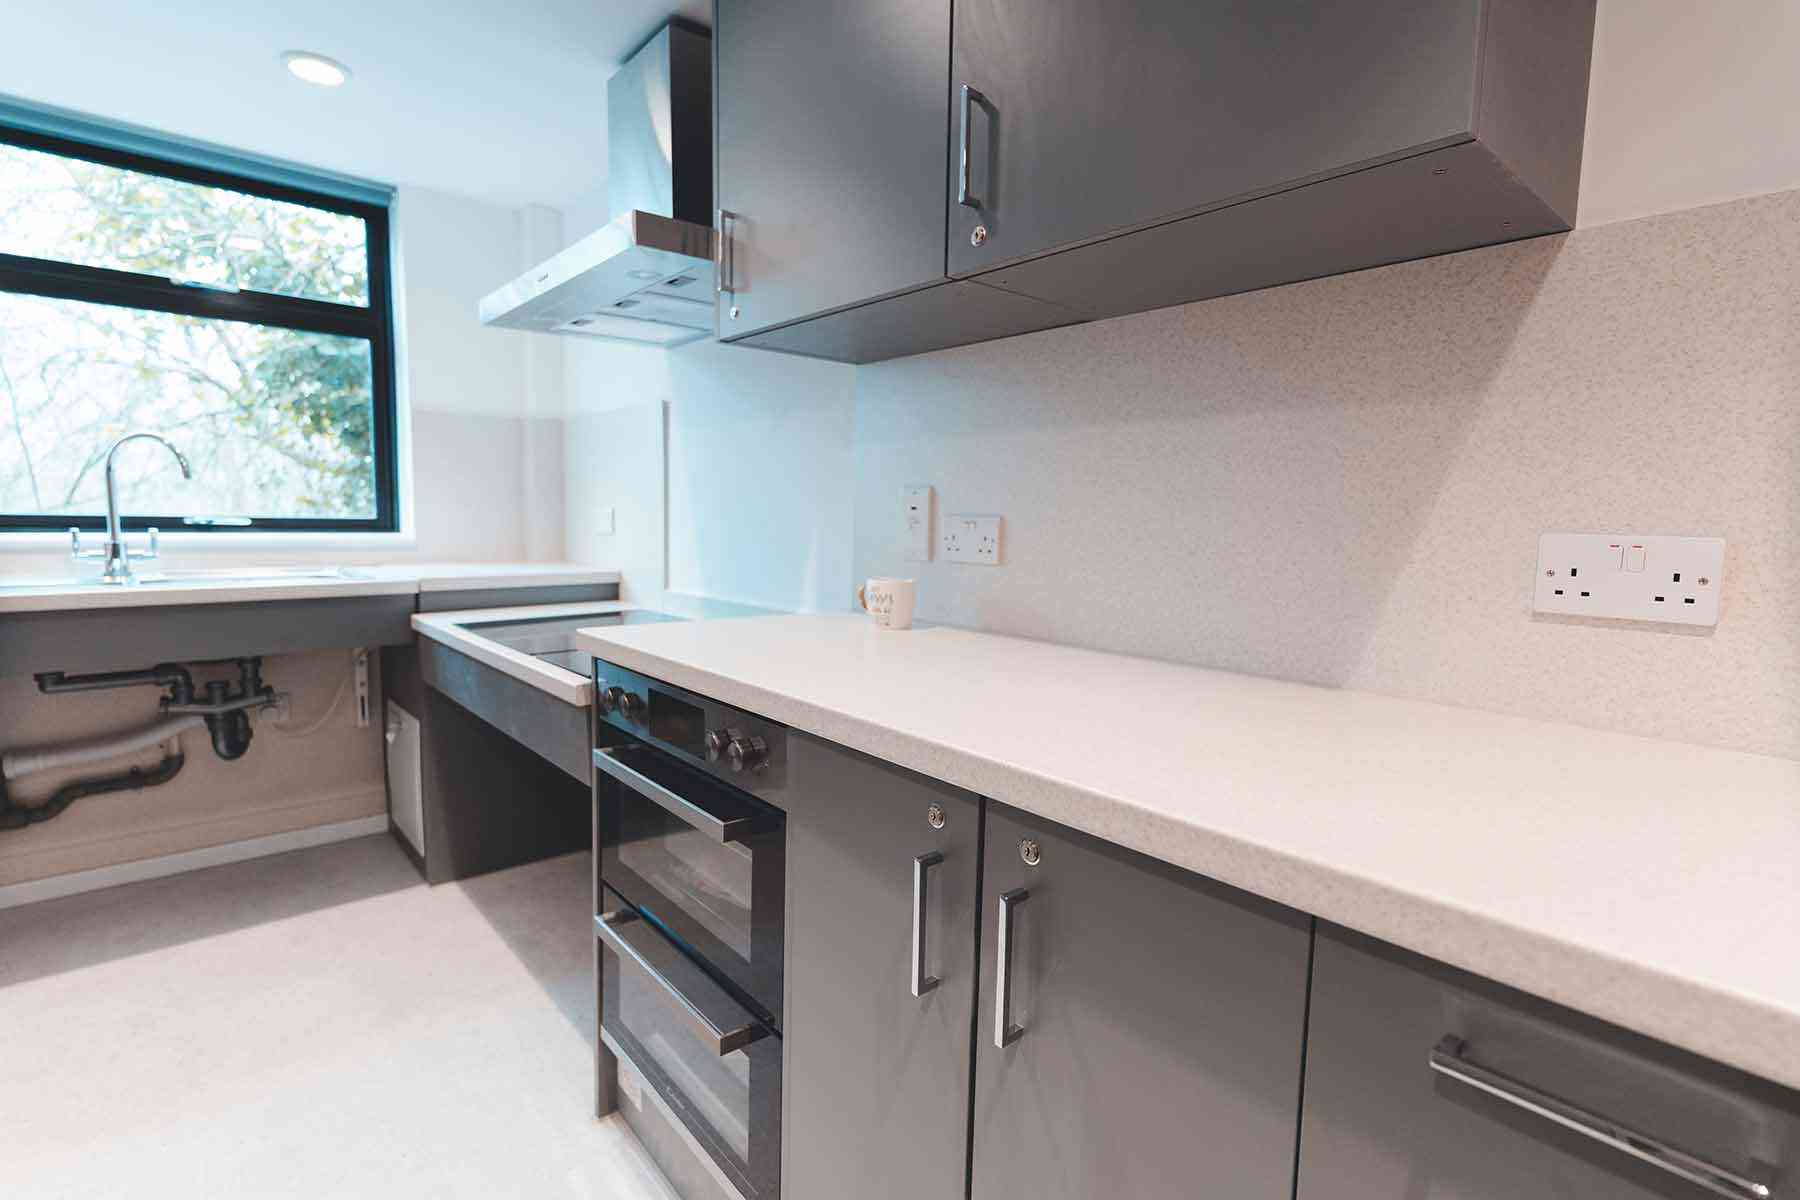 Adapted kitchen (Chancellors Hall)